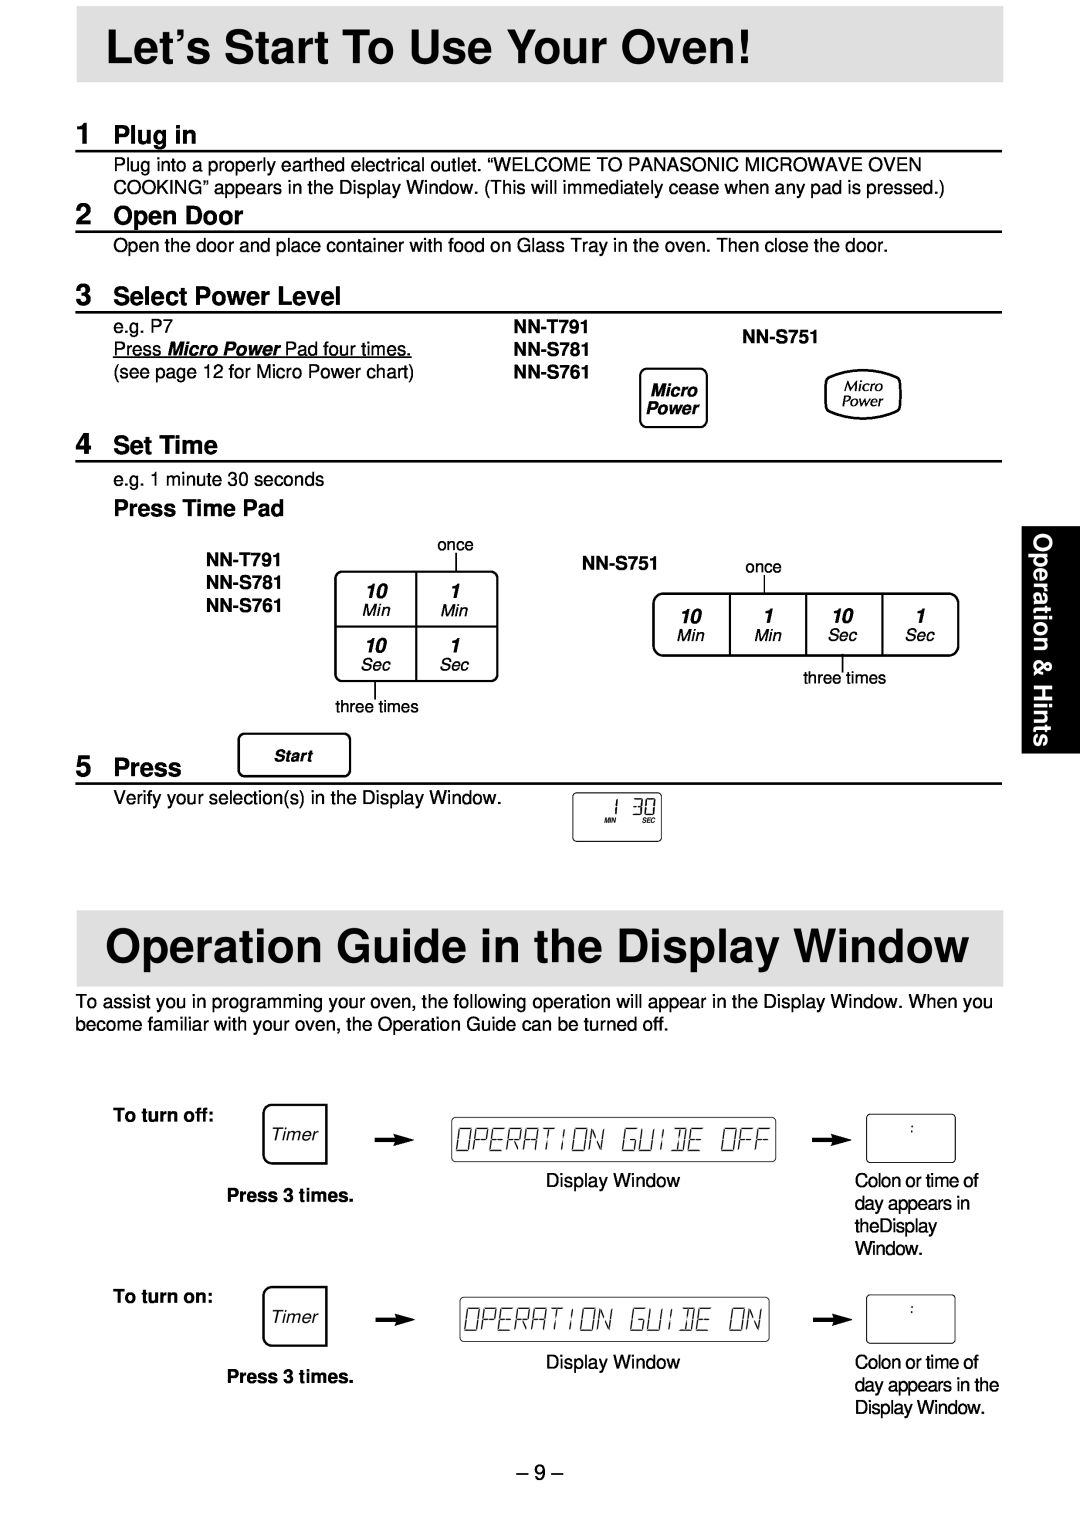 Panasonic NN-S781 Let’s Start To Use Your Oven, Operation Guide in the Display Window, Plug in, Open Door, Set Time, Press 